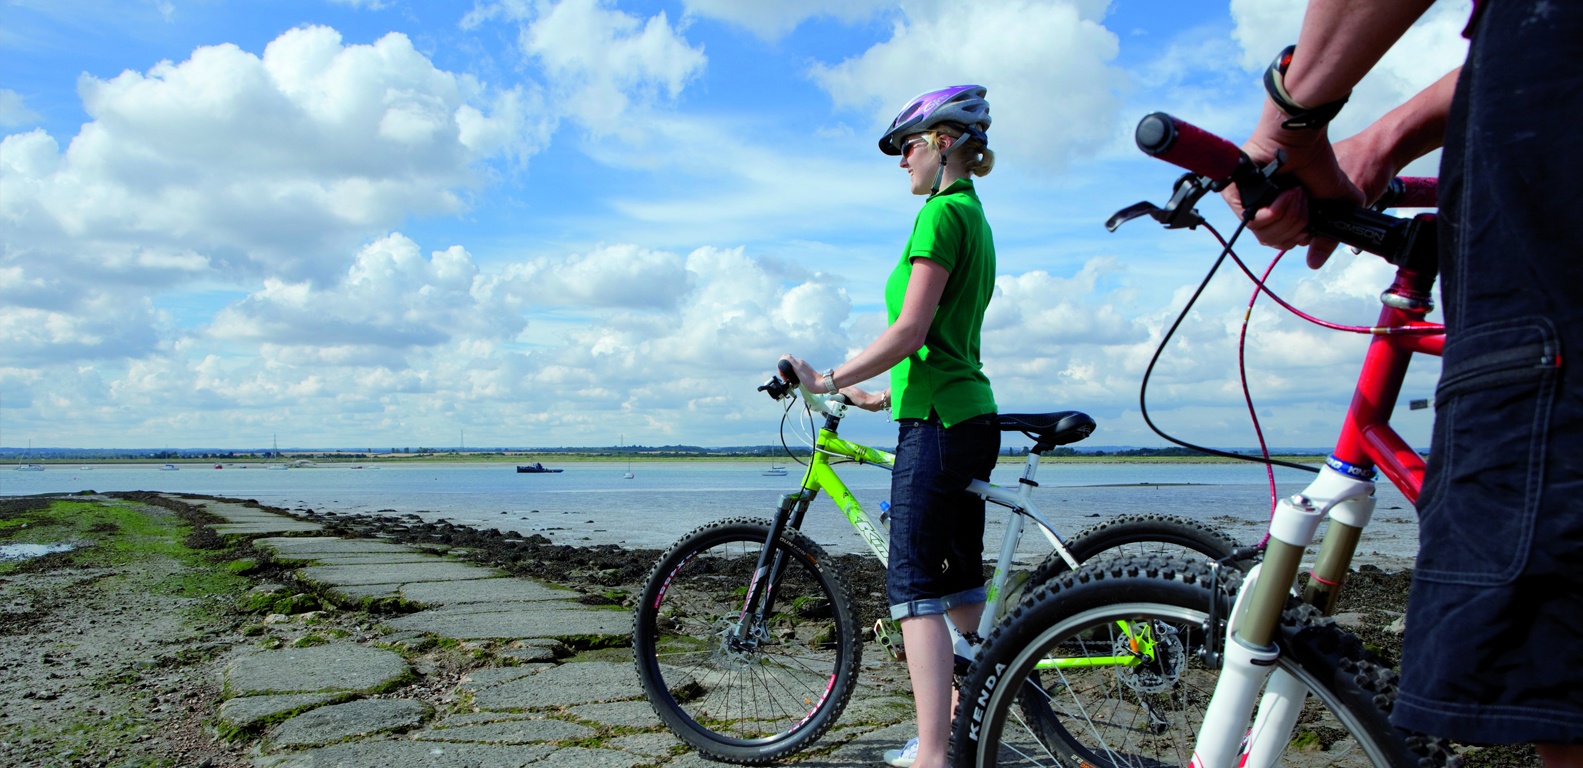 Explore the Isle of Sheppey on your cycle.